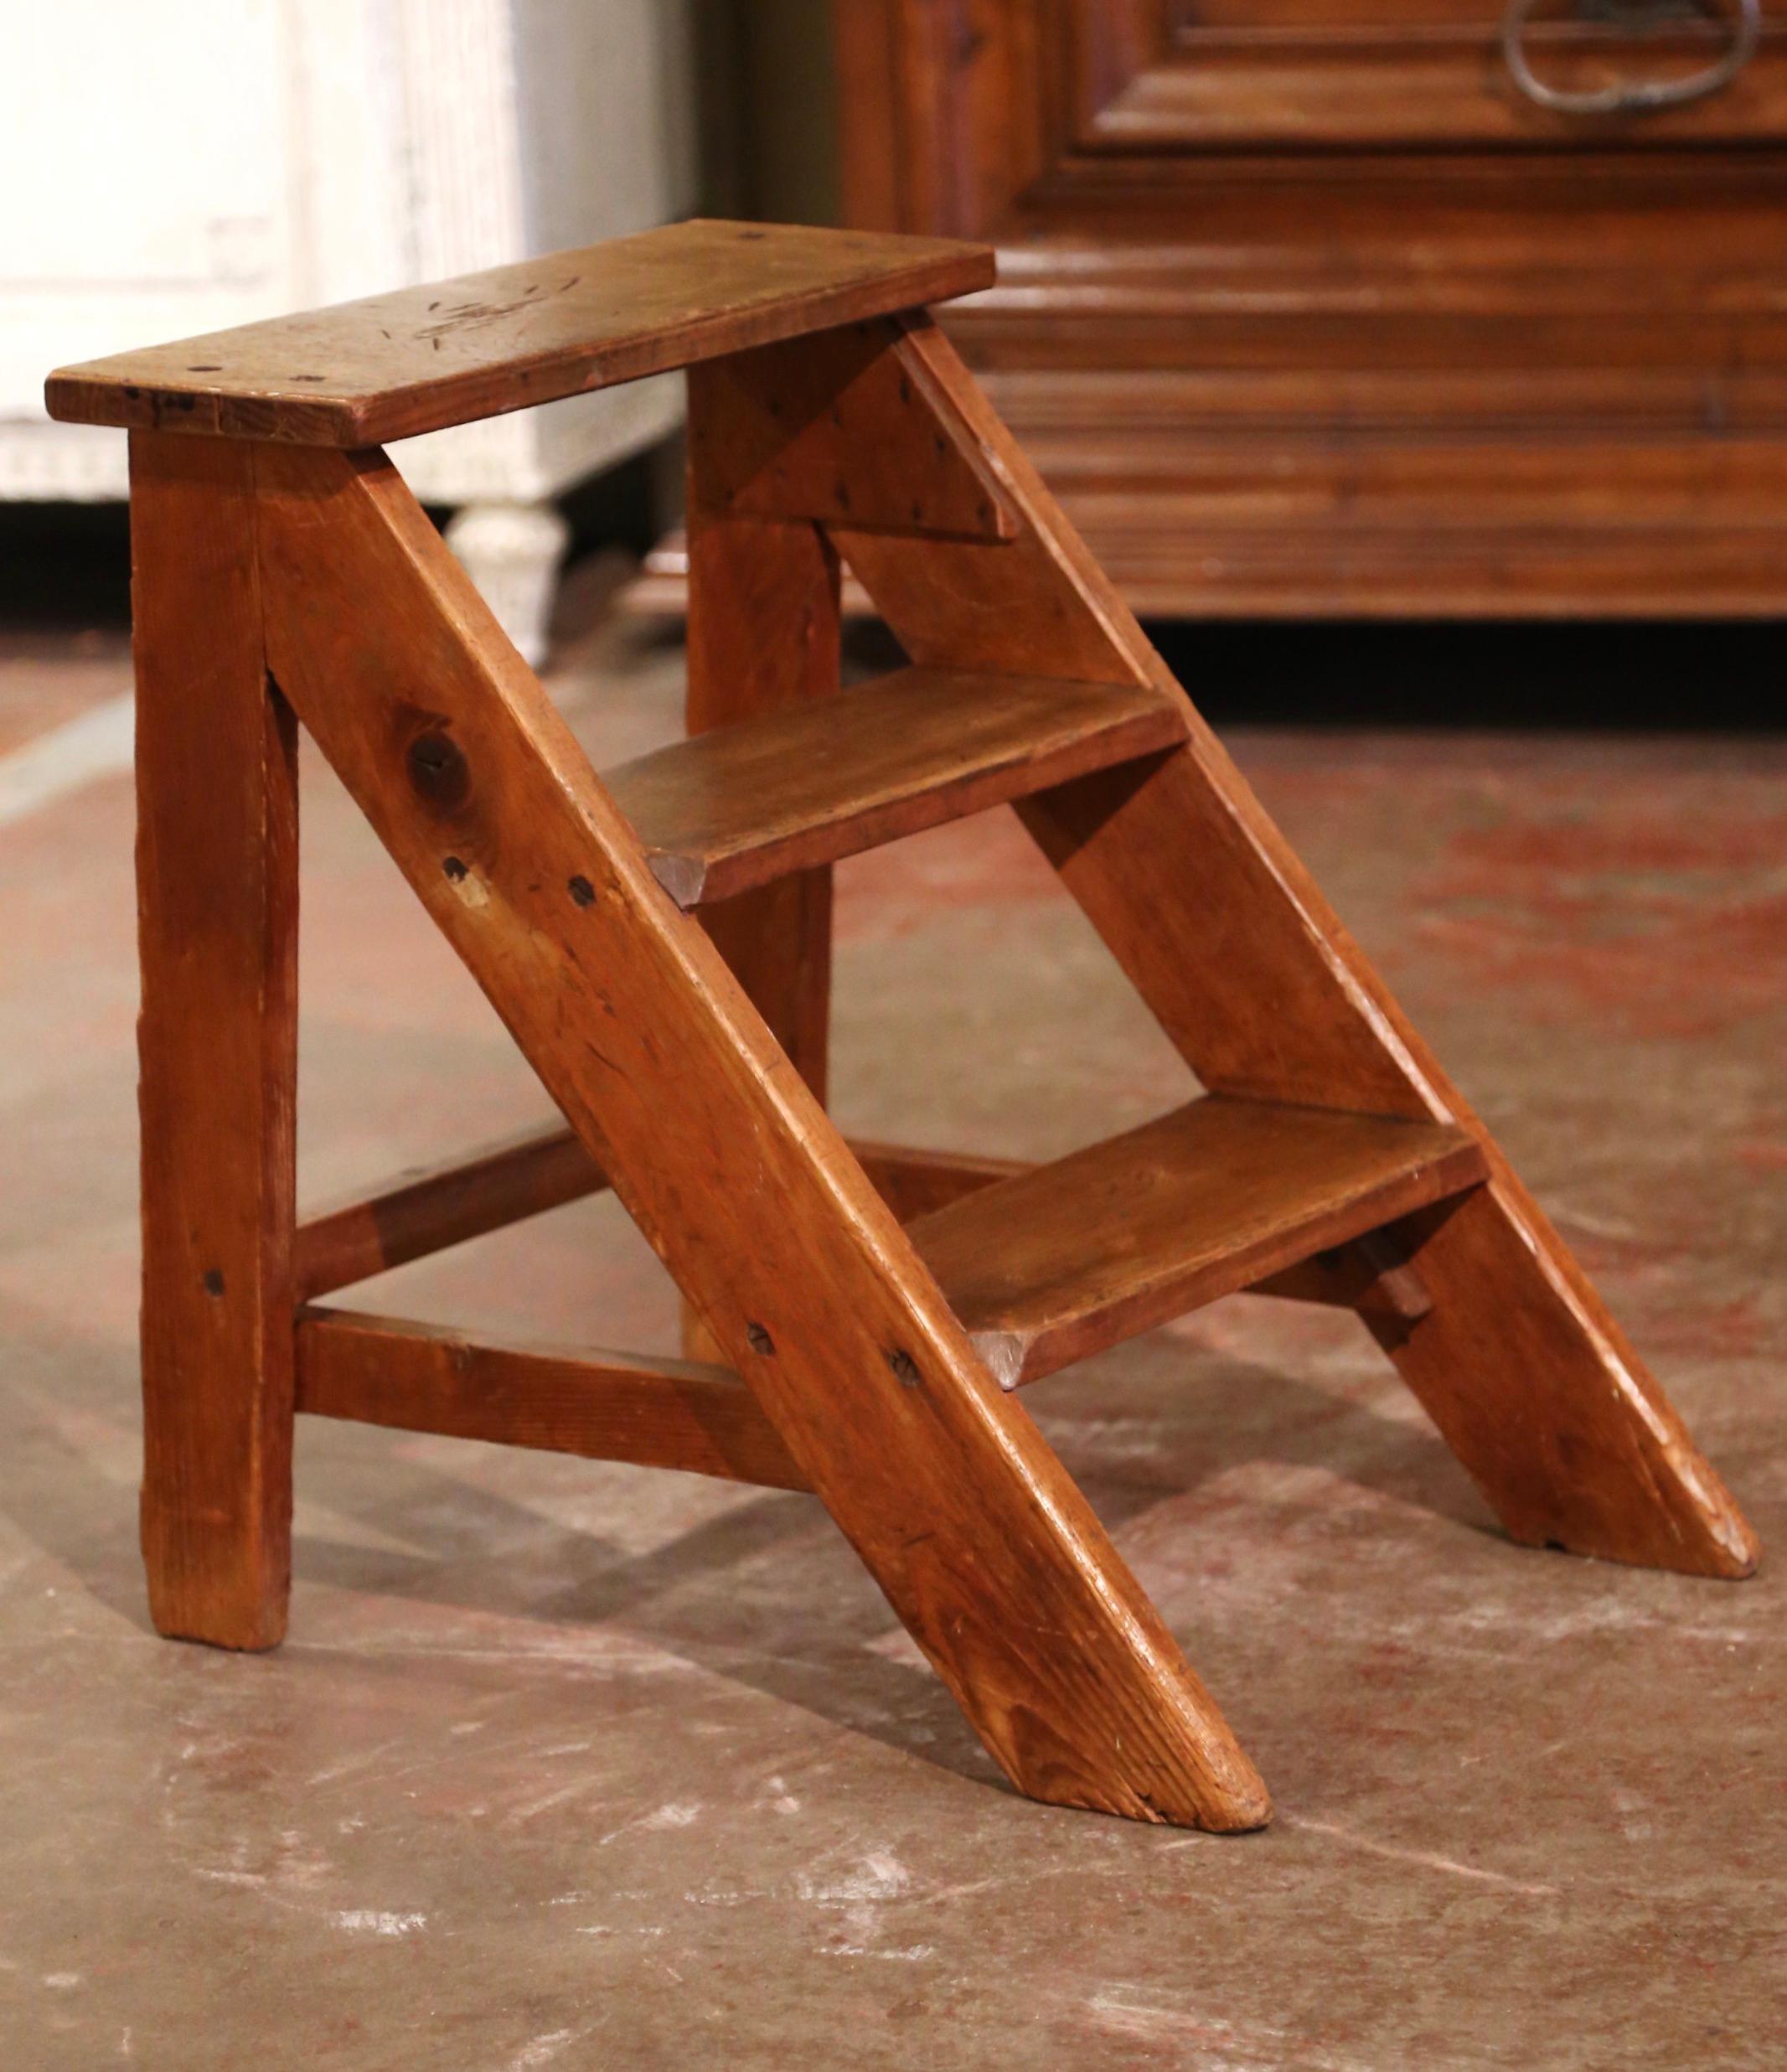 This elegant antique library ladder was created in Normandy France, circa 1920. Made of pine and oak, the sturdy step ladder features three steps including a wider step at the top. The small ladder is in excellent condition commensurate with age and